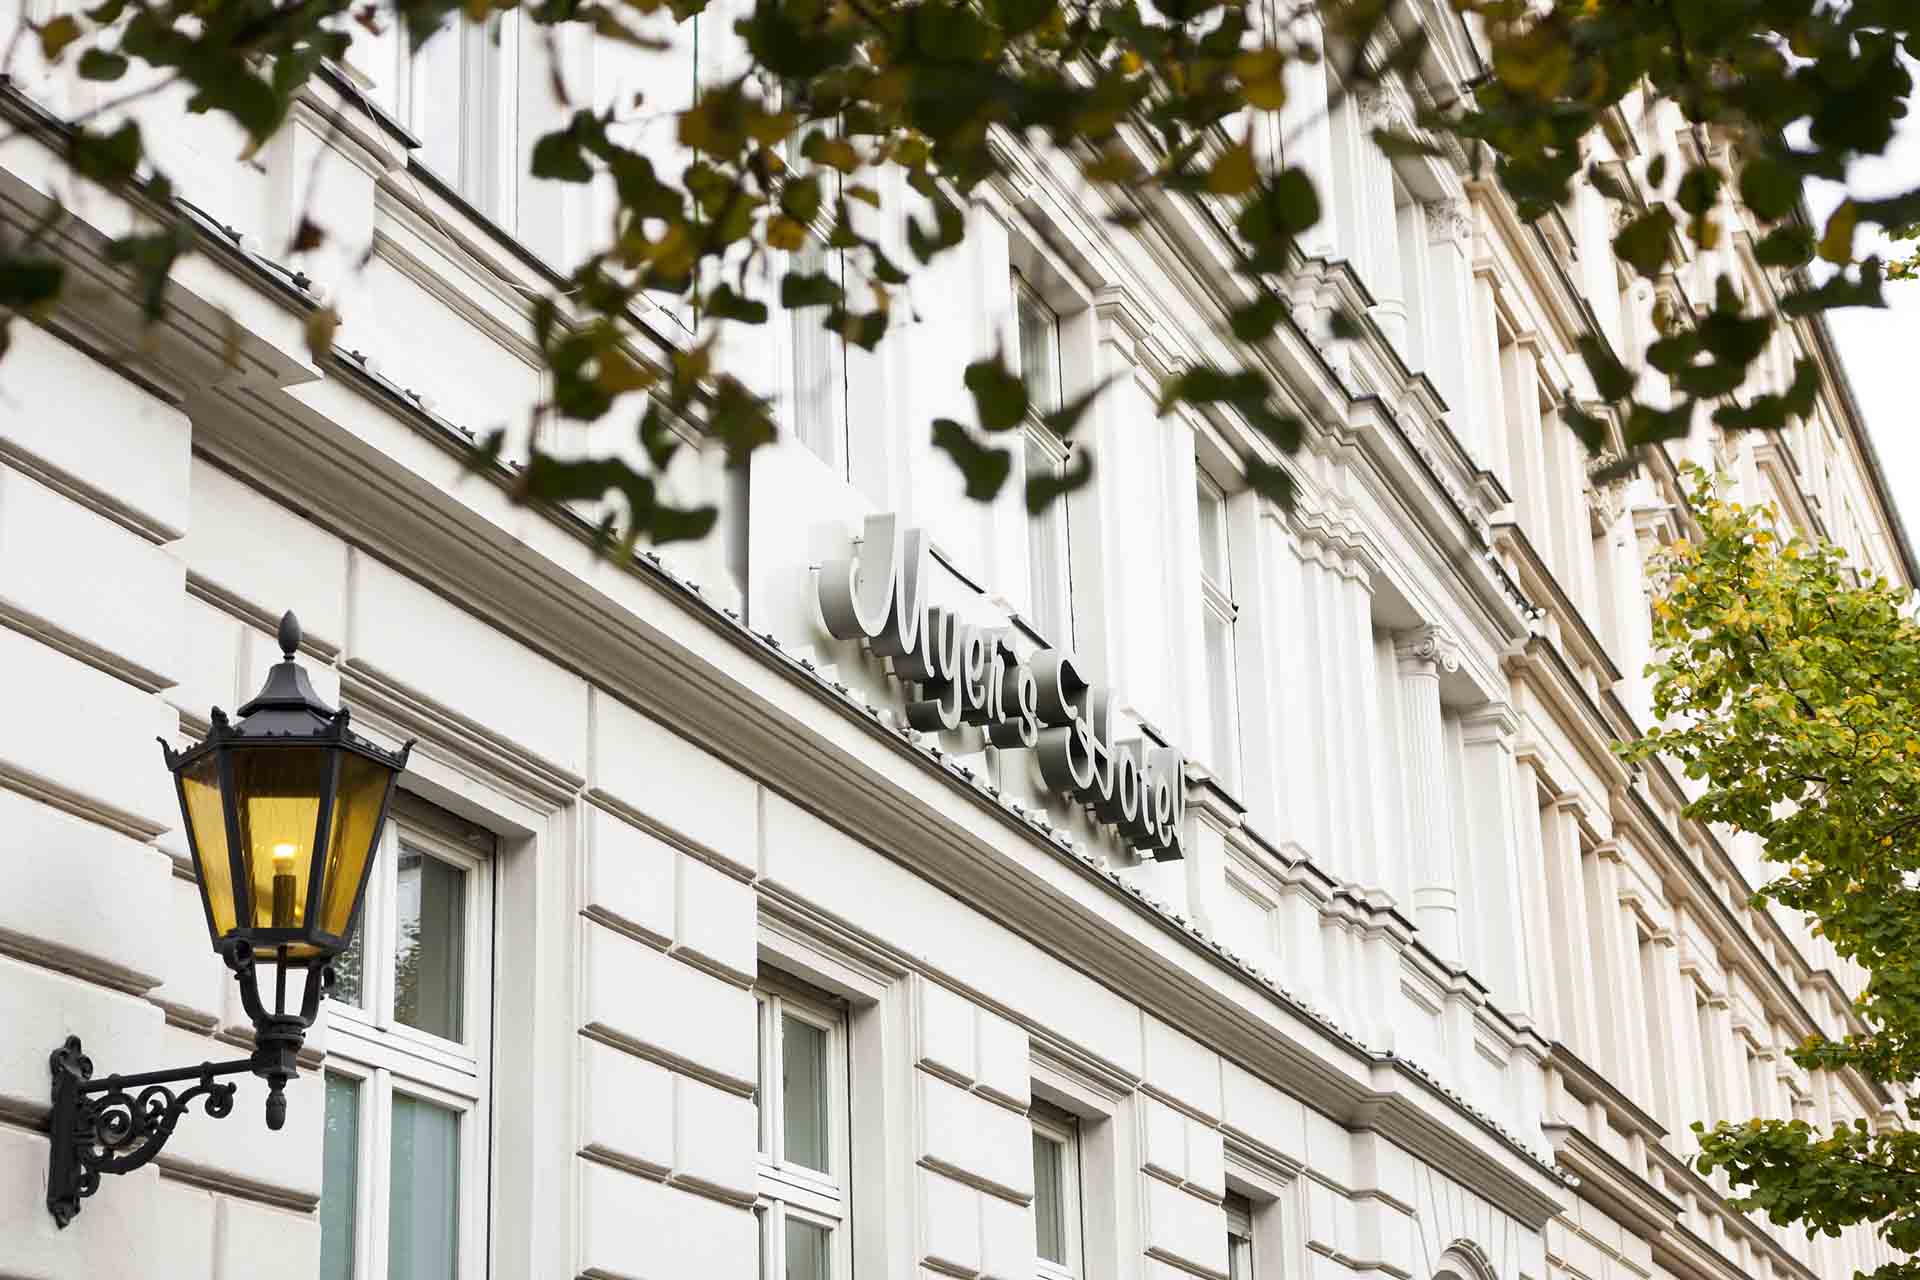 Myers Hotel is one of the best boutique hotels in berlin showing exterior of the building